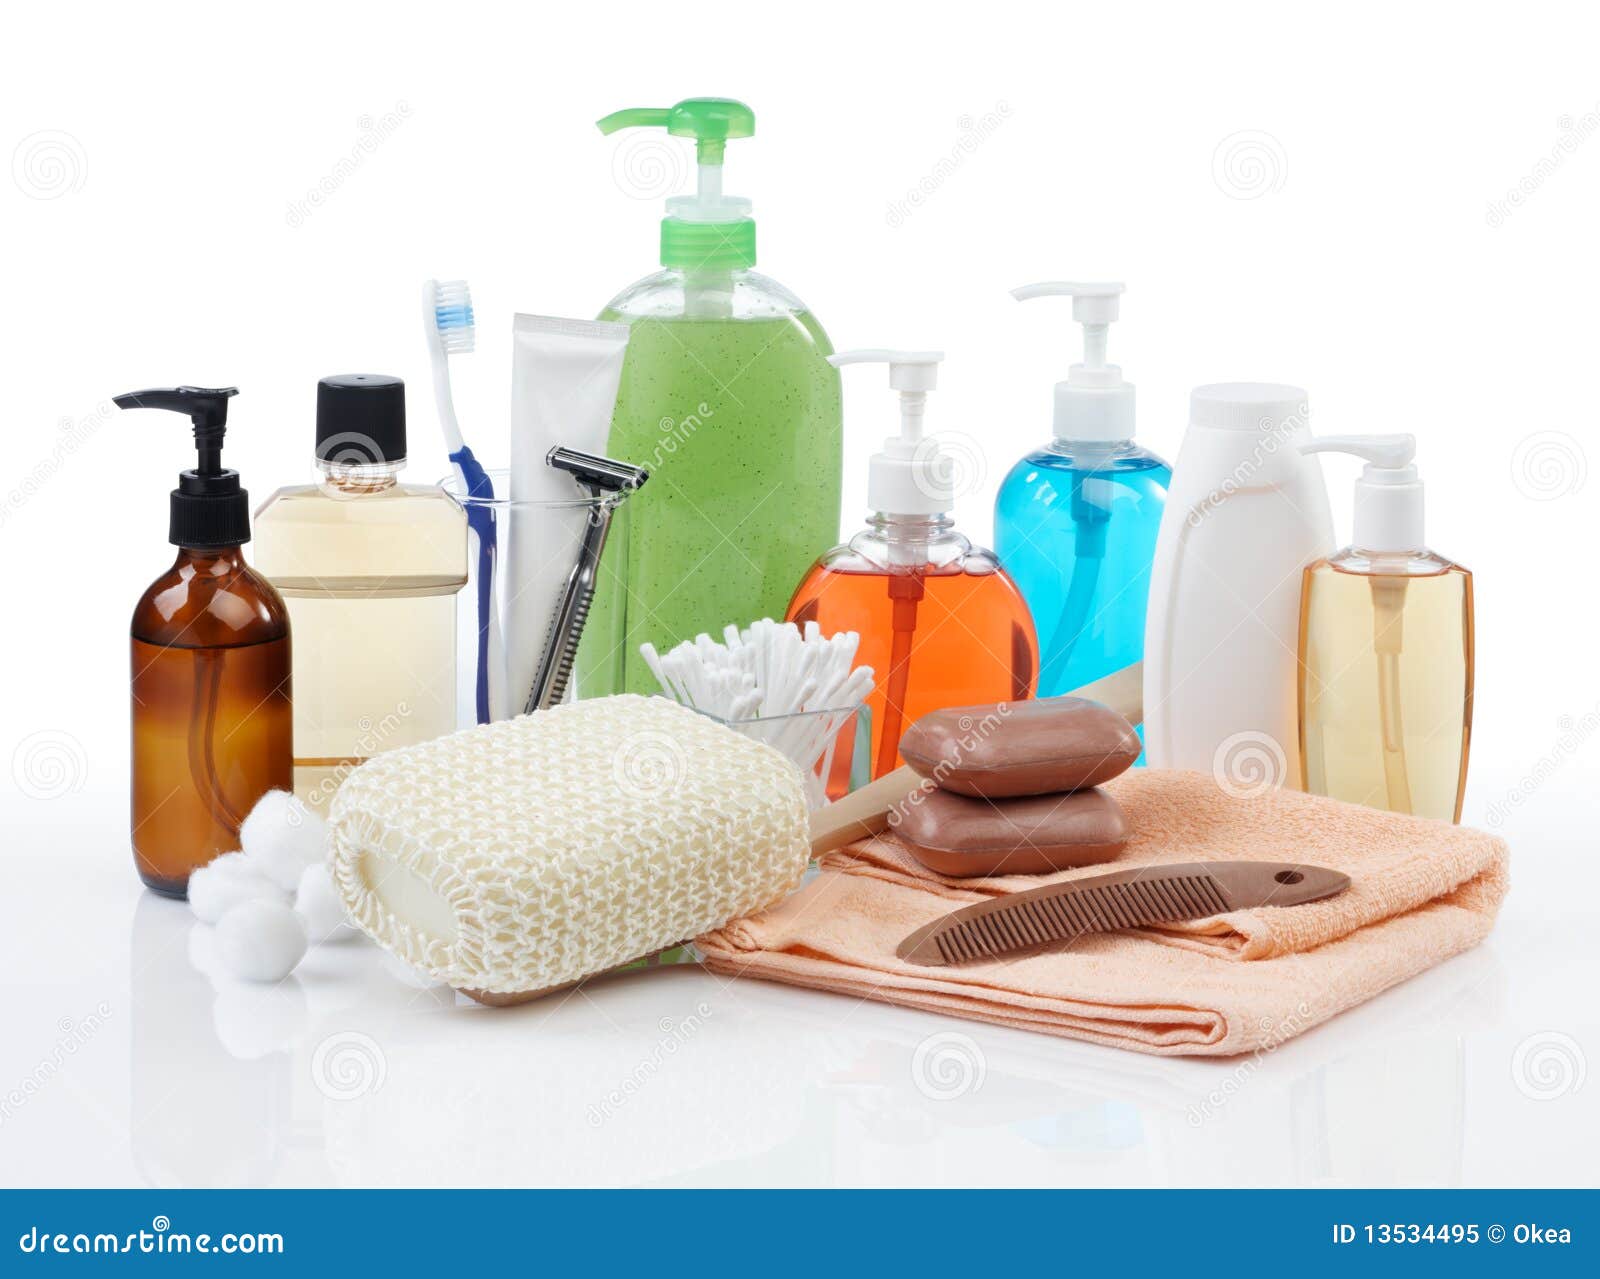 personal hygiene products